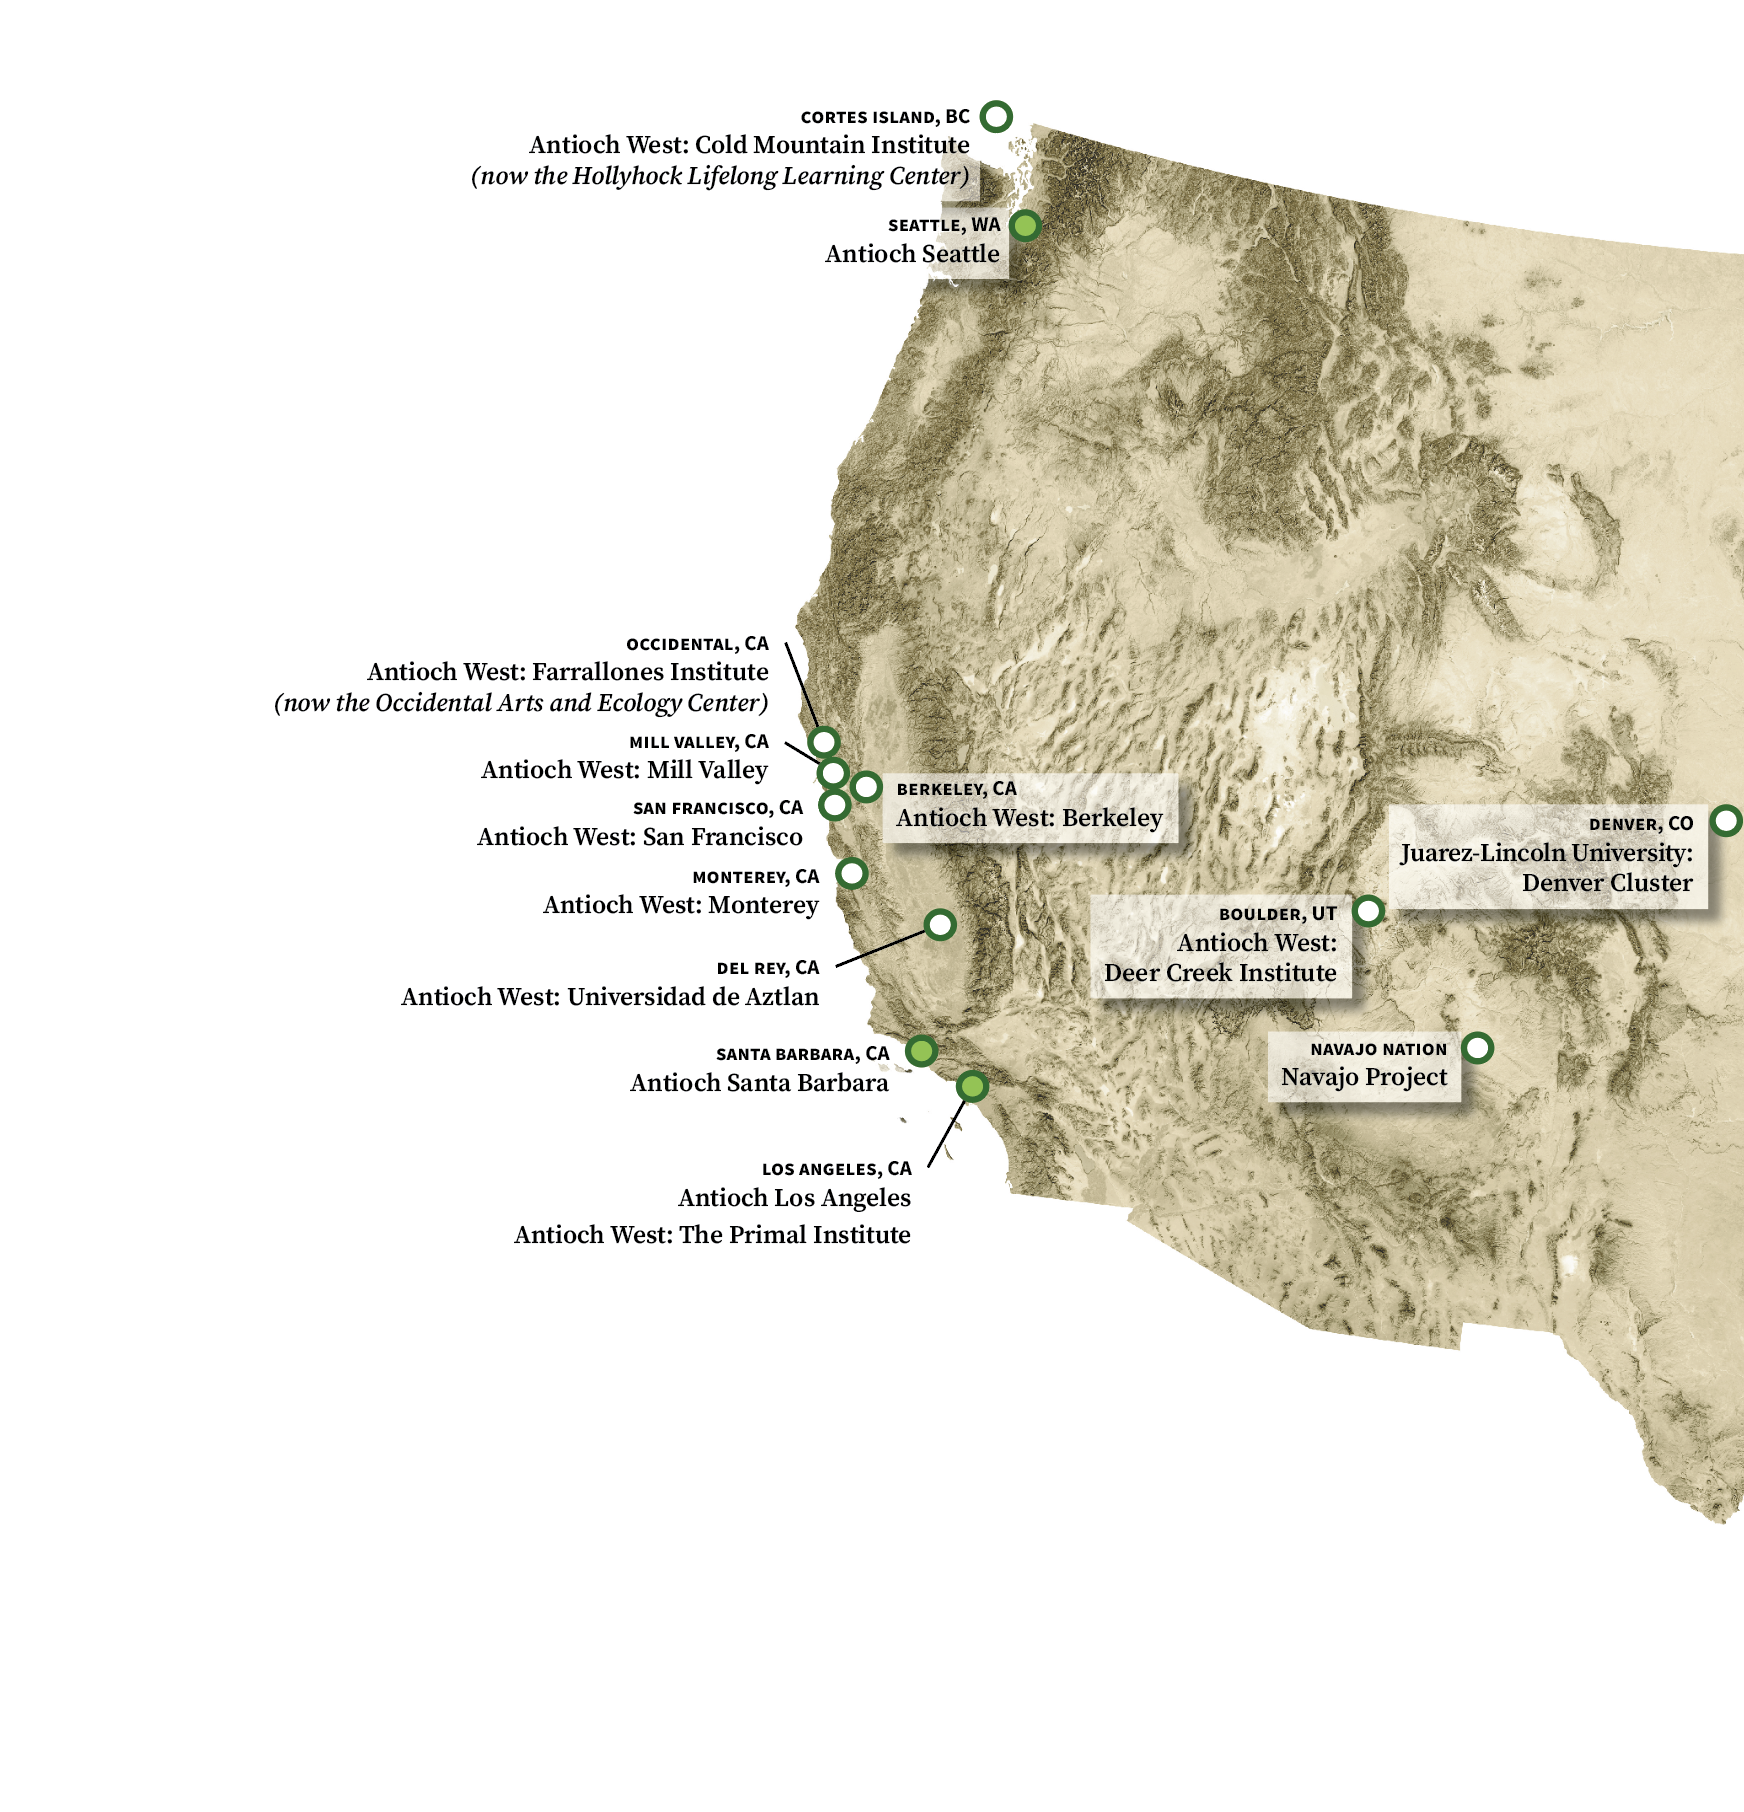 A map showing current and closed Antioch campus locations in the western United States.